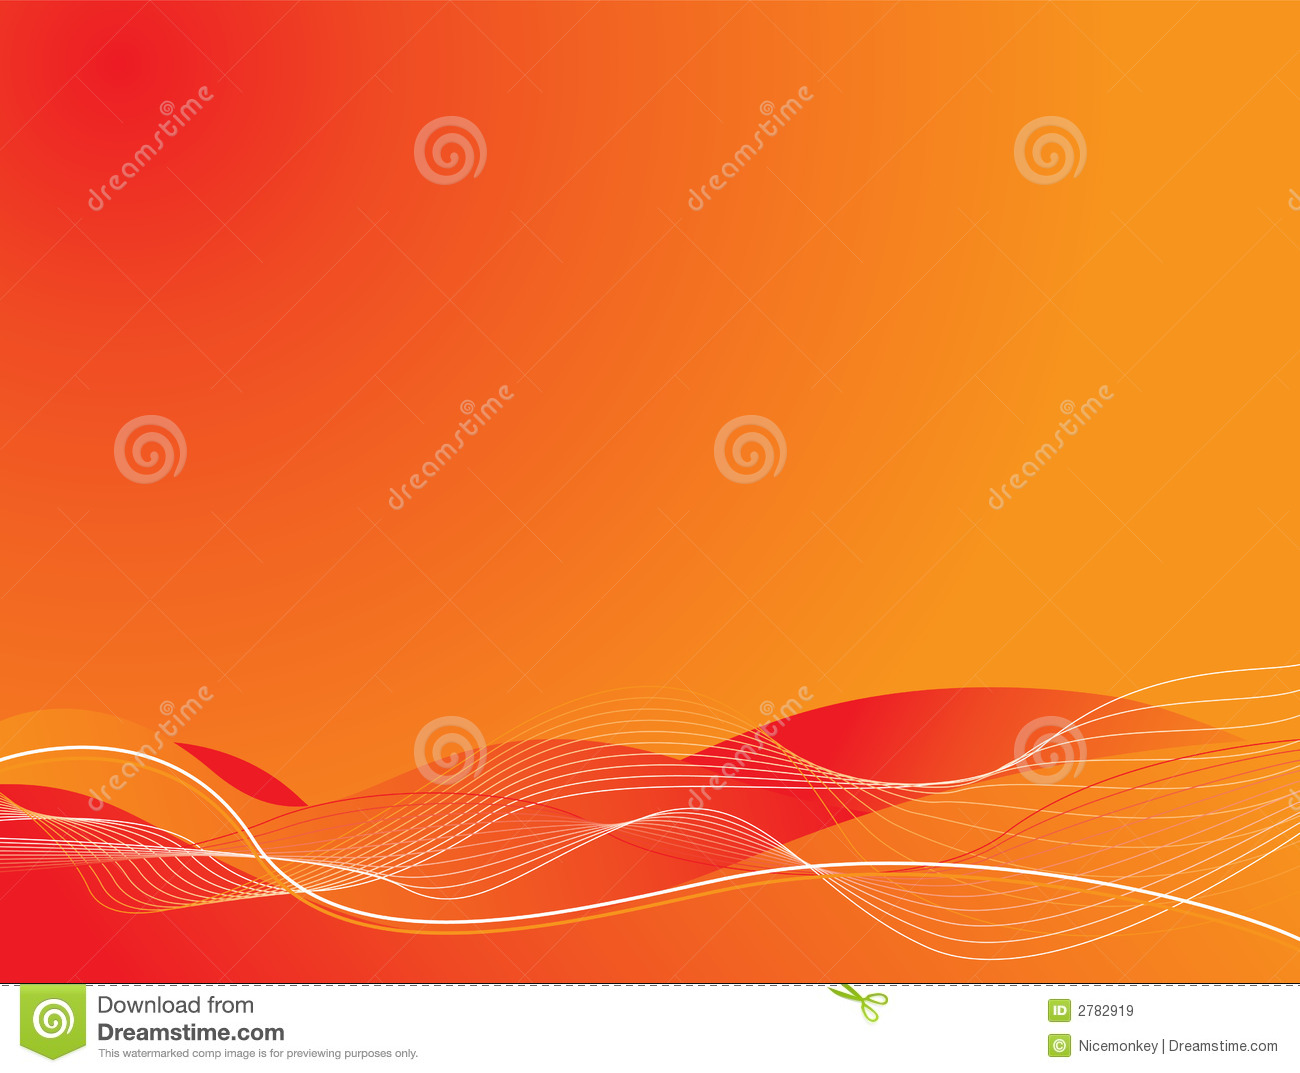 Lava Flow Royalty Free Stock Images   Image  2782919